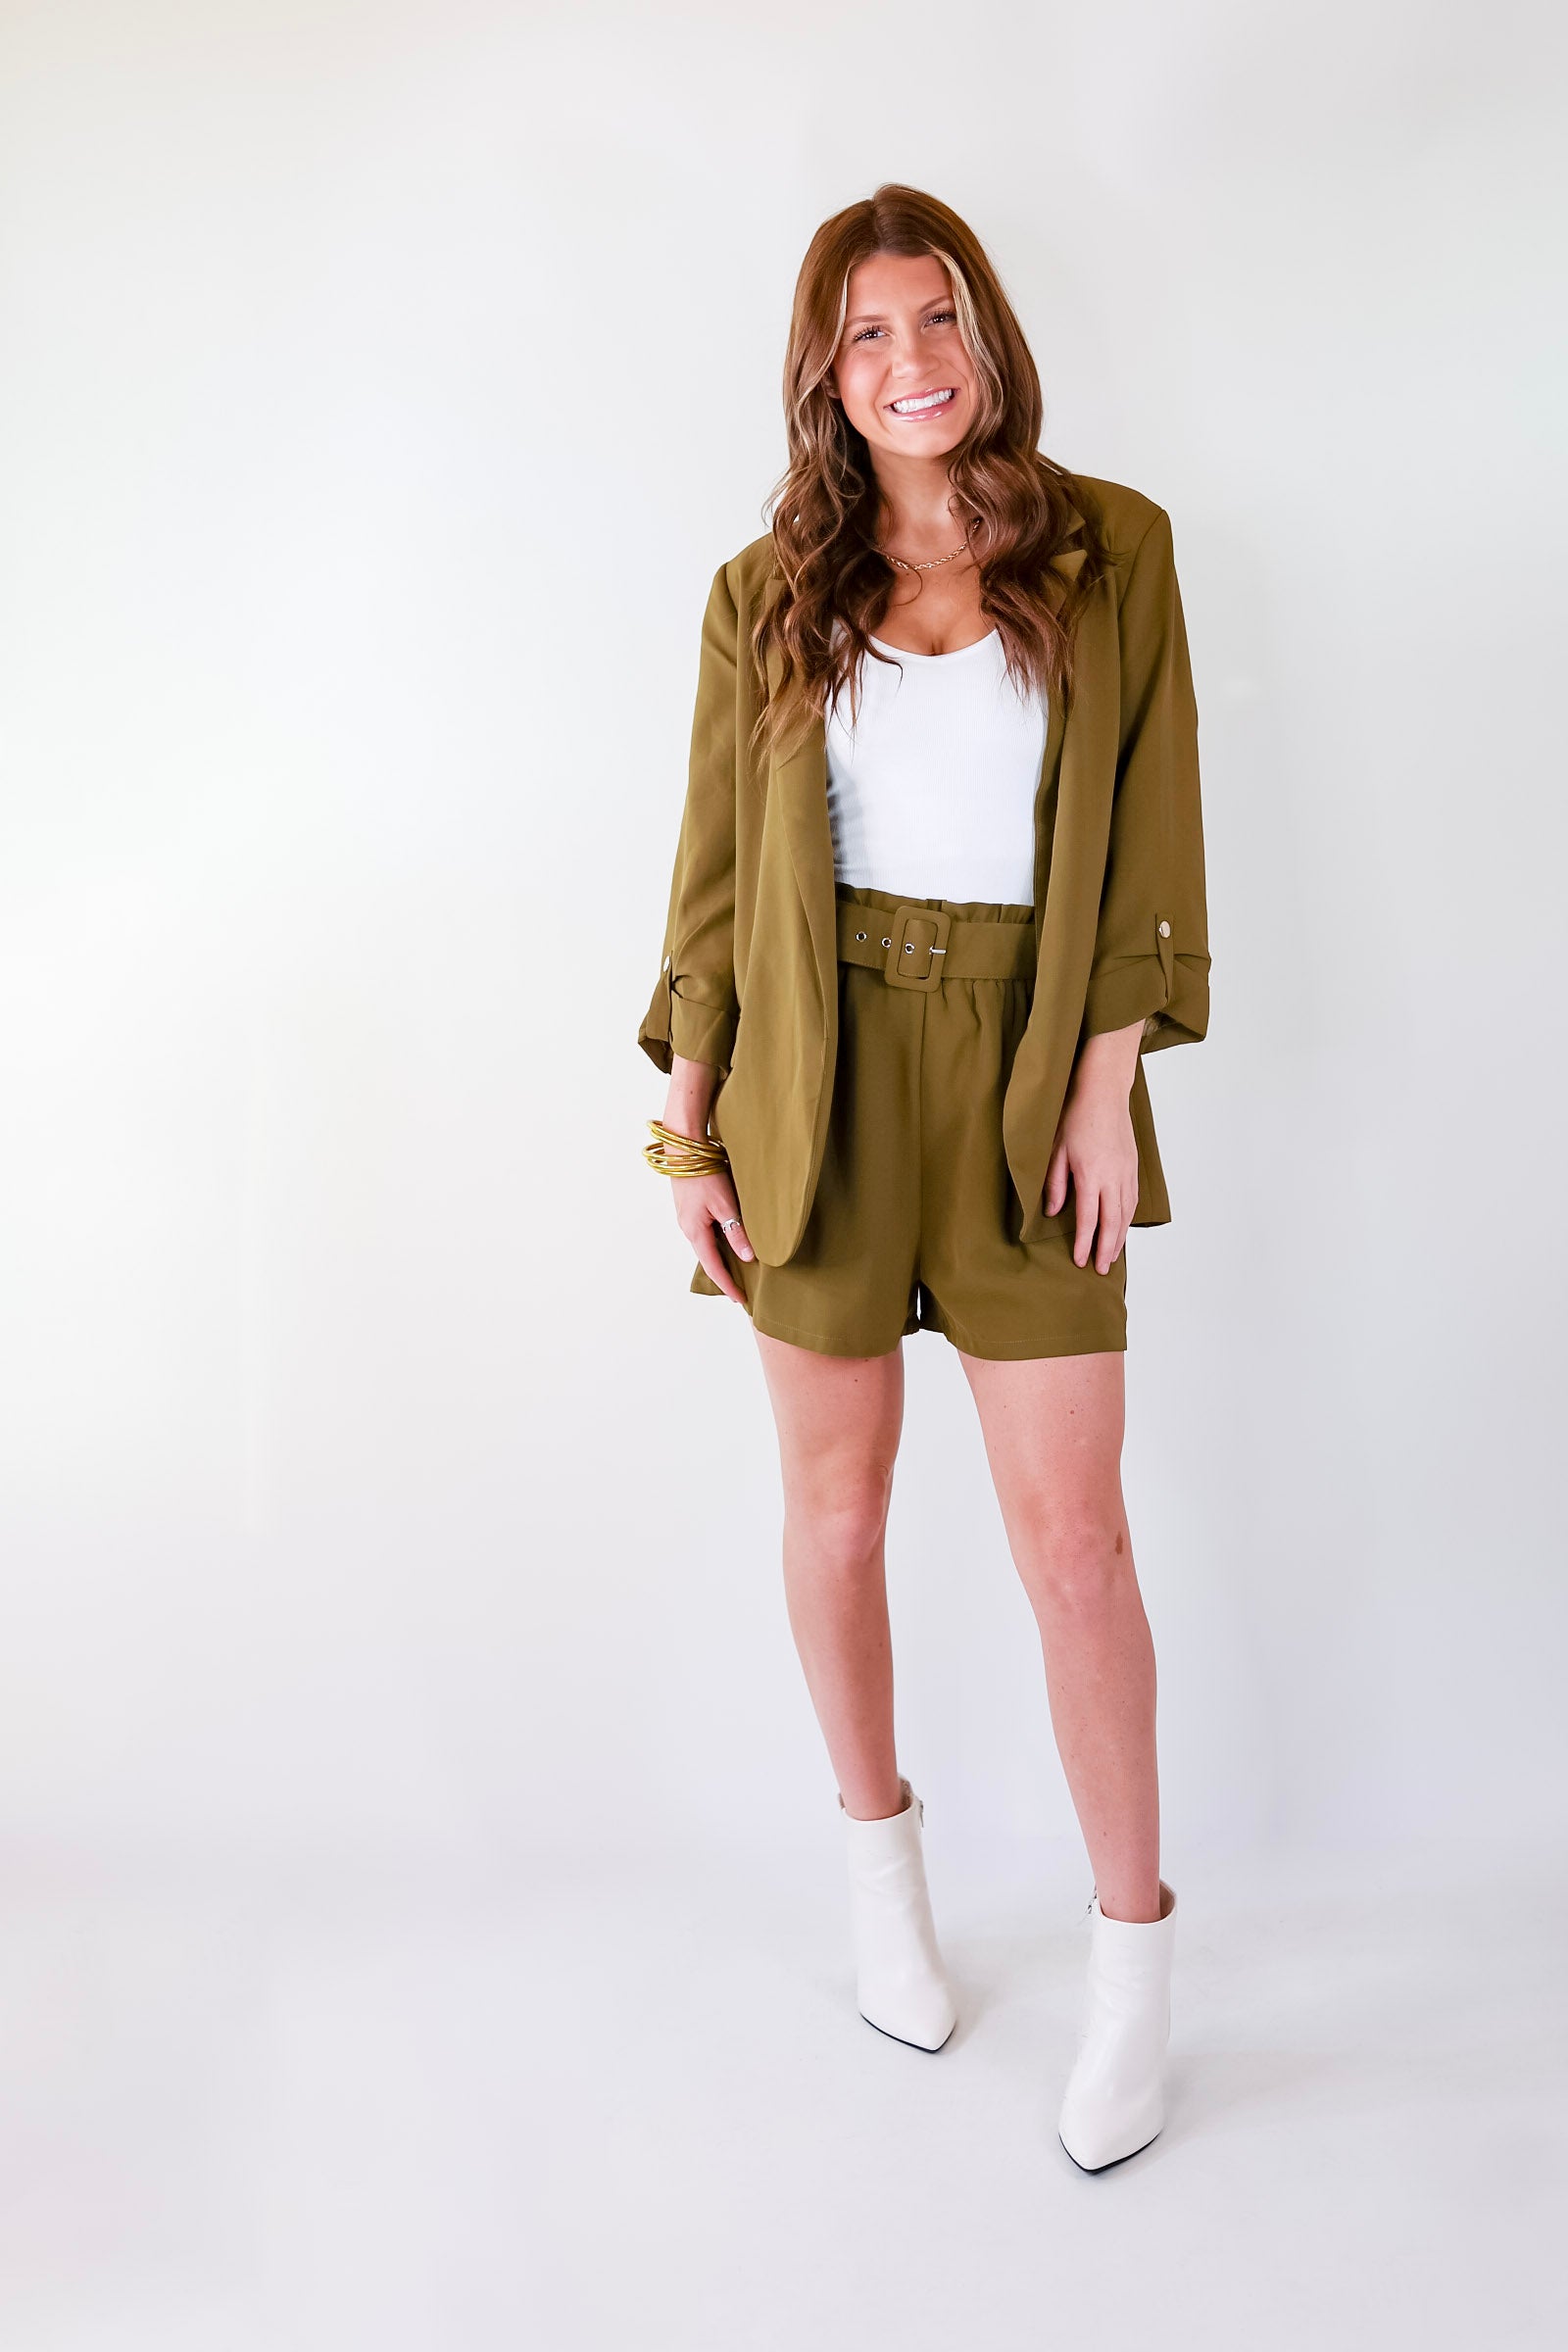 Fine Like Wine Belted Solid Shorts in Olive Green - Giddy Up Glamour Boutique